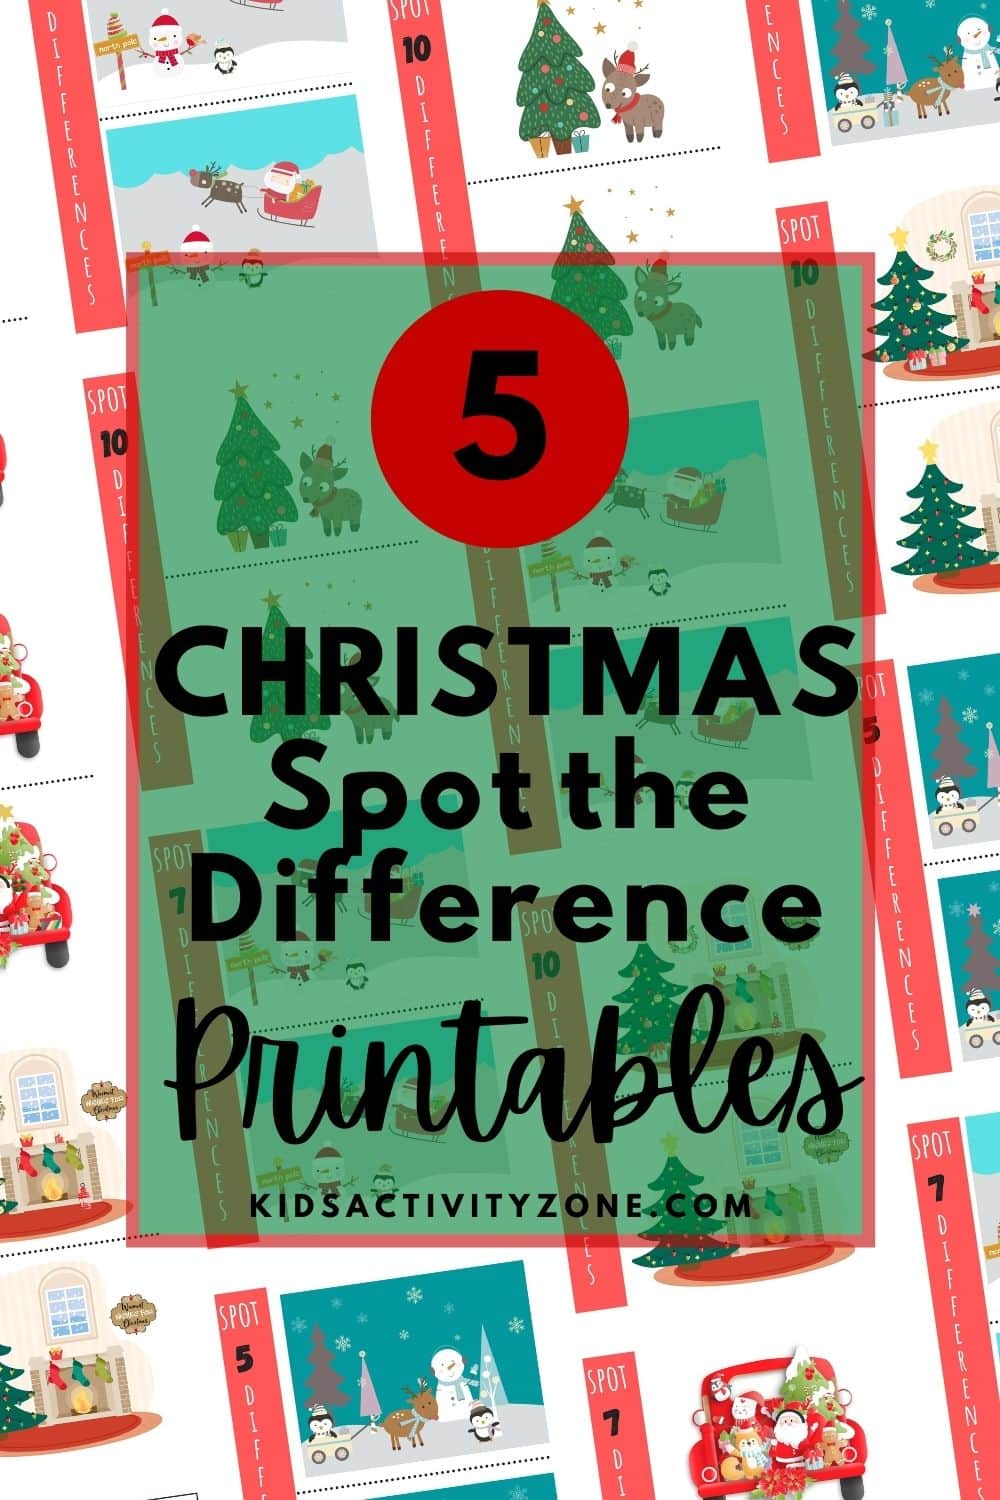 Christmas Spot the Difference is a fun and free printable for kids to keep their brains working while having fun with a Christmas themed activity. It's perfect to send home with students over holiday break, as an activity during a class party or just because!